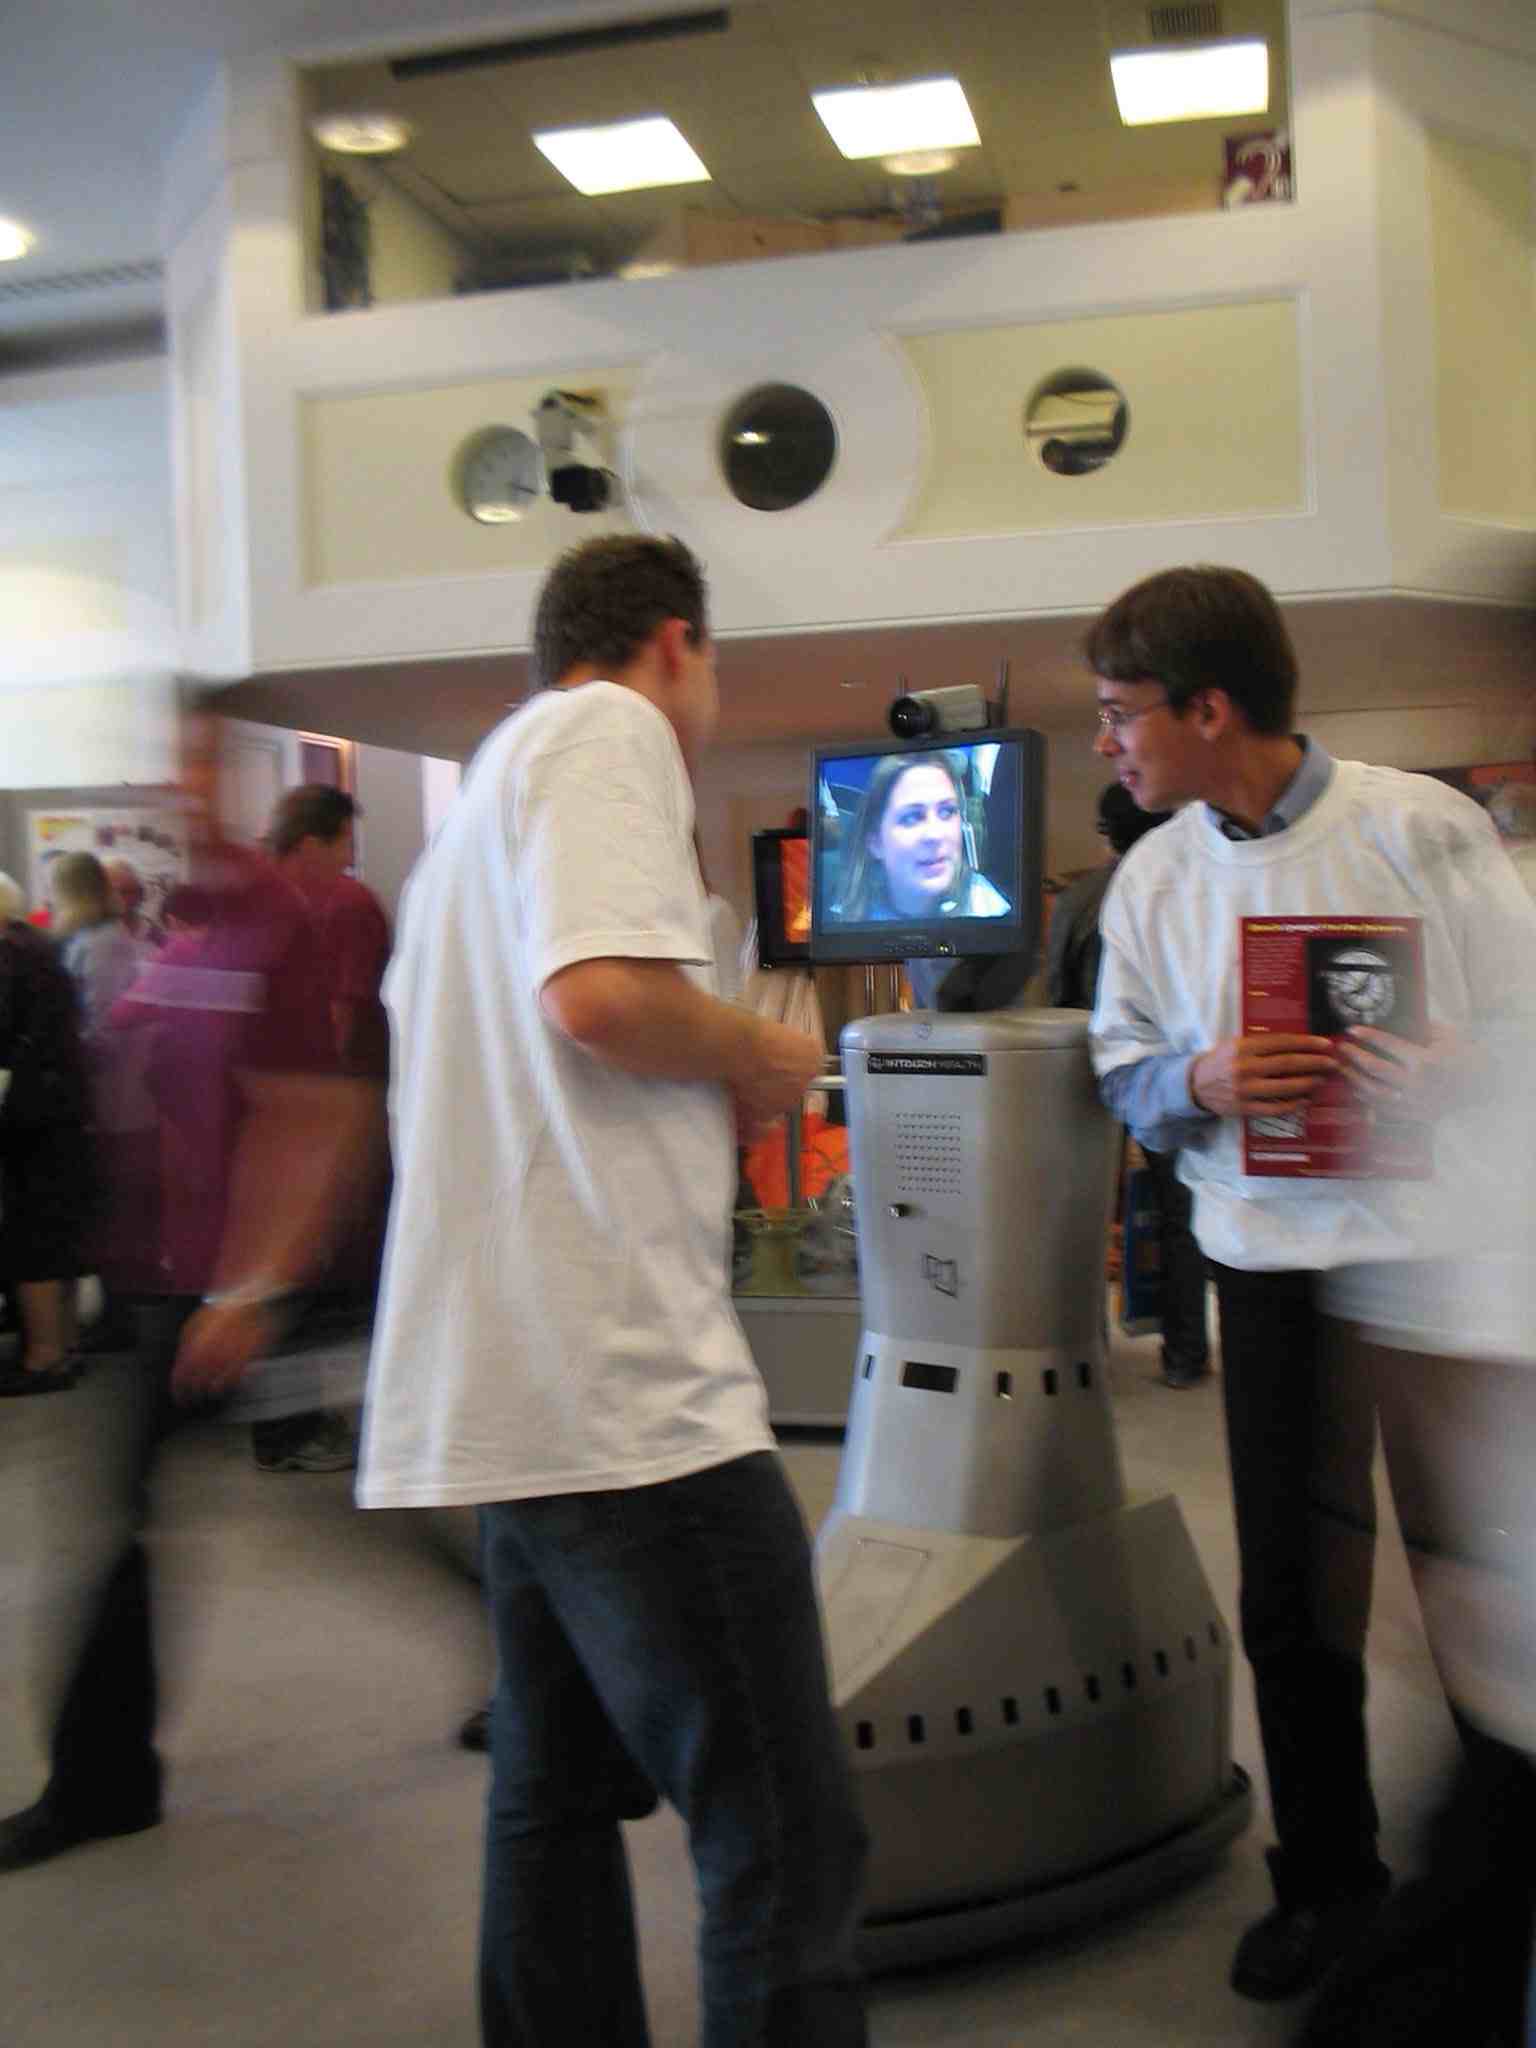 The Imperial Robot being persuaded to visit the Sodarace stall